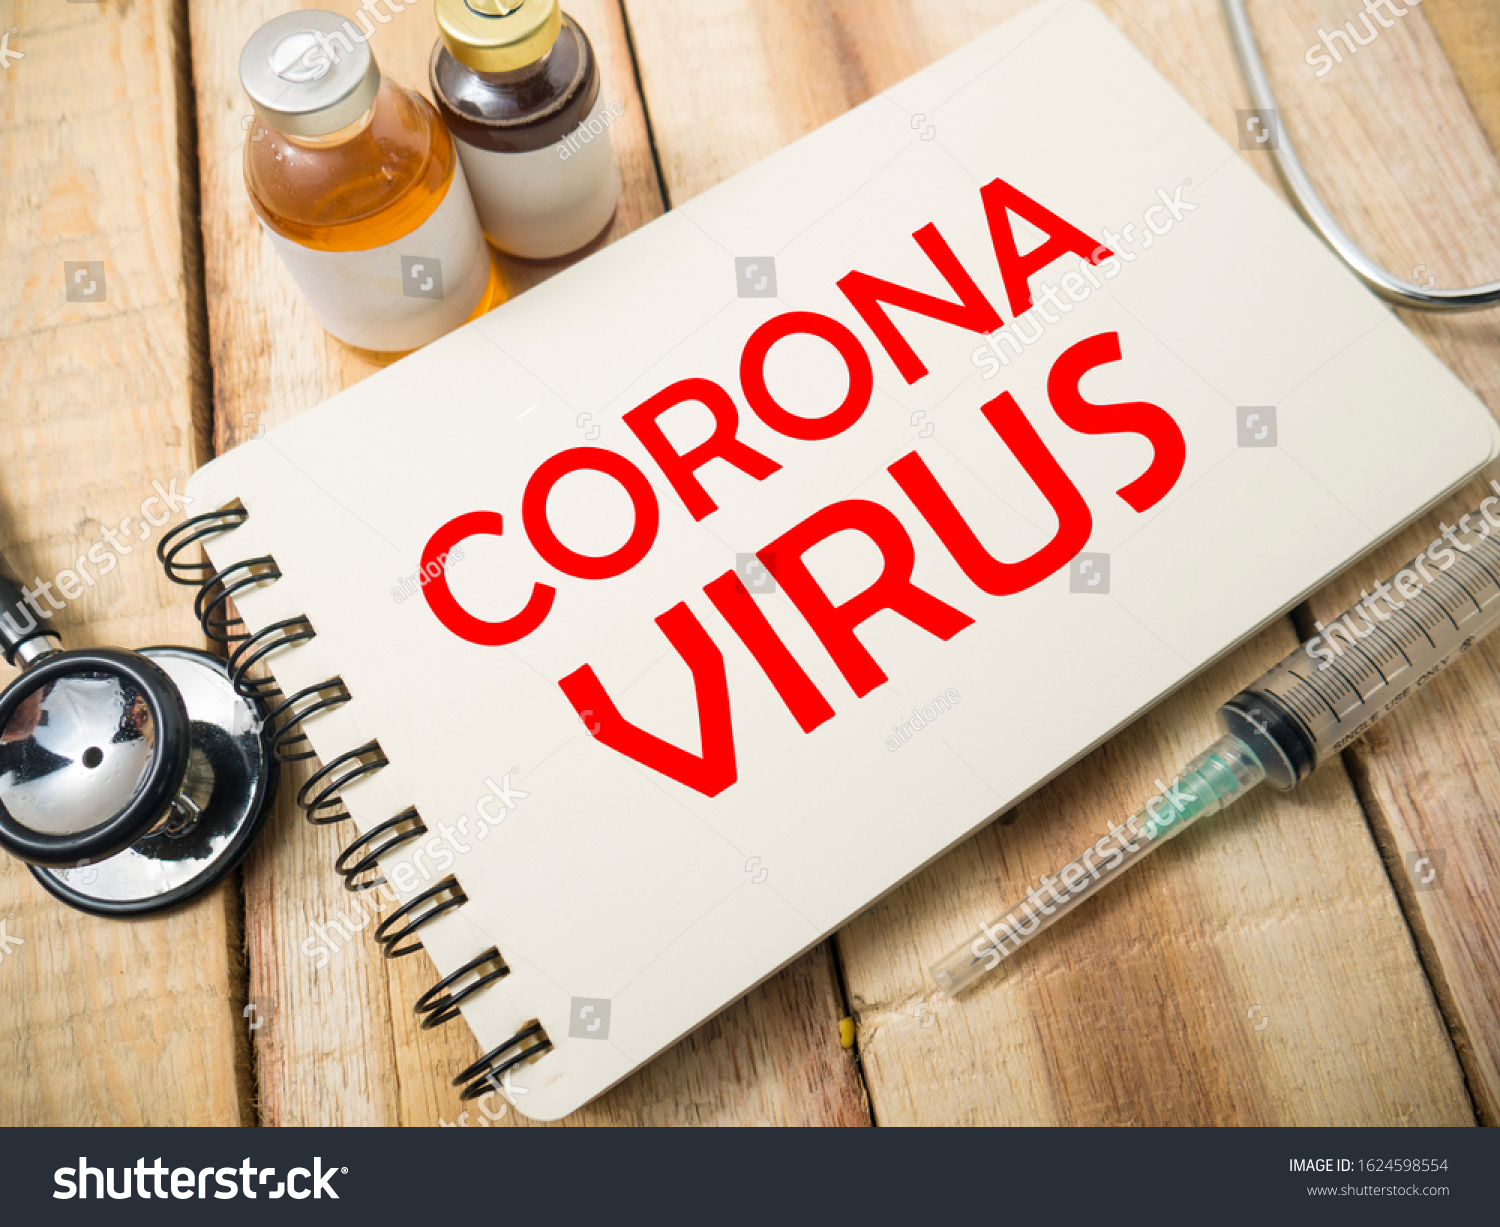 Corona virus, mysterious viral pneumonia in Wuhan, China. Similar to MERS CoV or SARS virus (severe acute respiratory syndrome). Health care and medical concept #1624598554